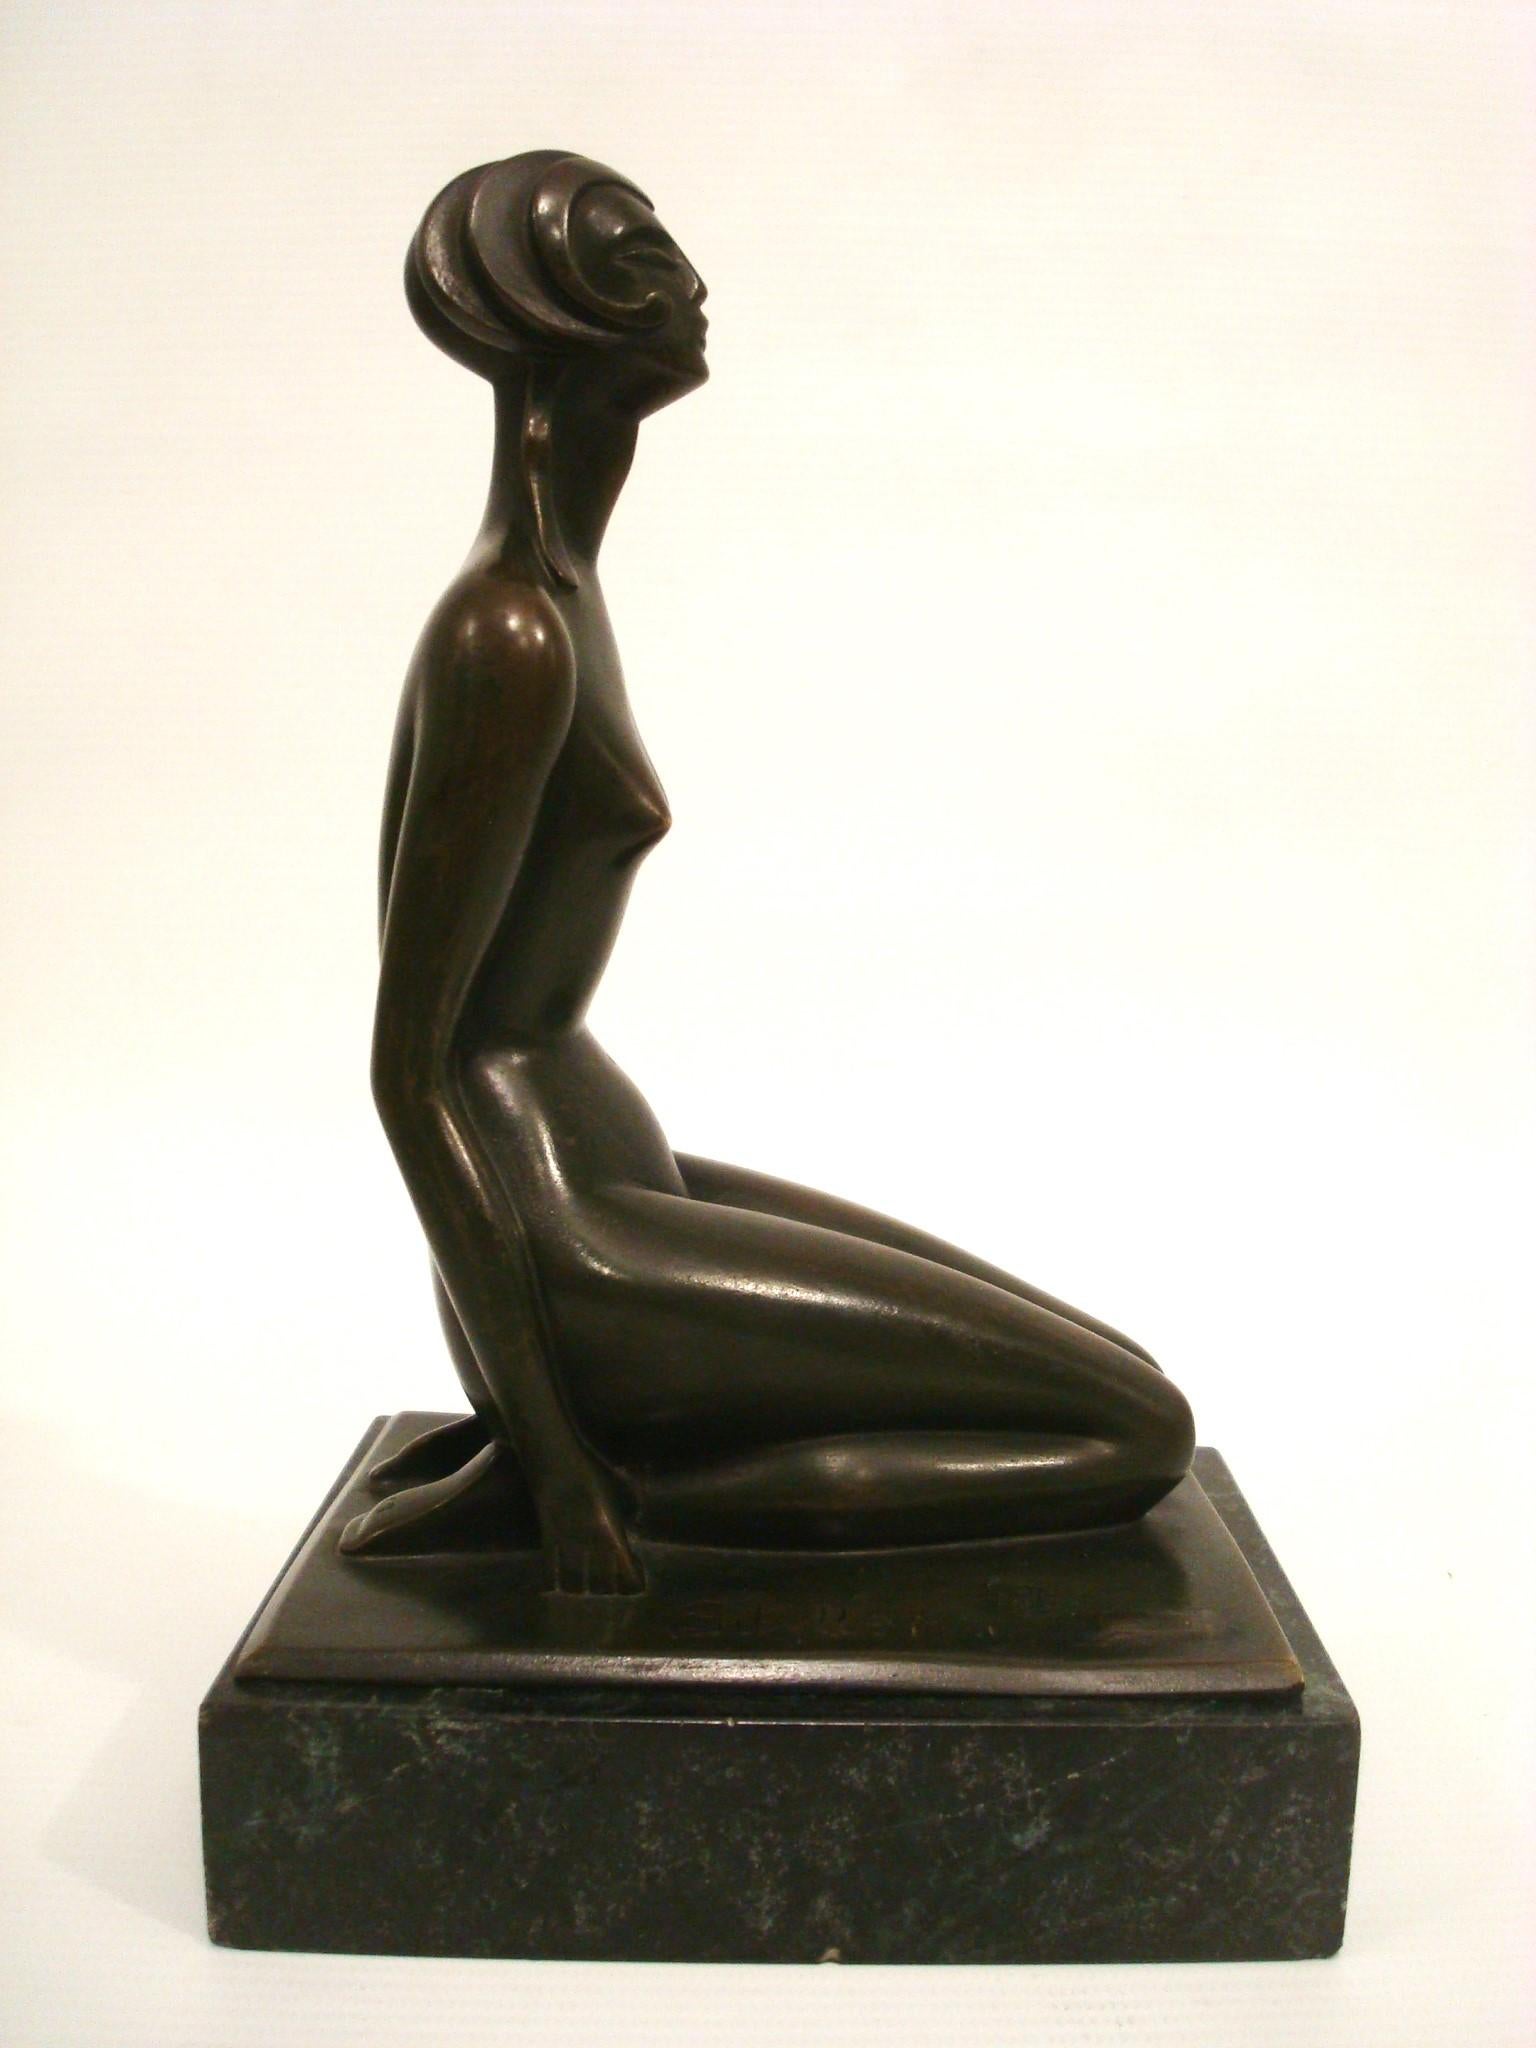 Art Deco Bronze Sculpture Figure of a Naked Woman by Sibylle May, France 1920´s
A wonderful art deco bronze sculpture by Sibylle May.
Signed in the bronze + foundry marks (LA STELE)
Rare French Art Deco bronze figure of Sibylle May.
English sculptor